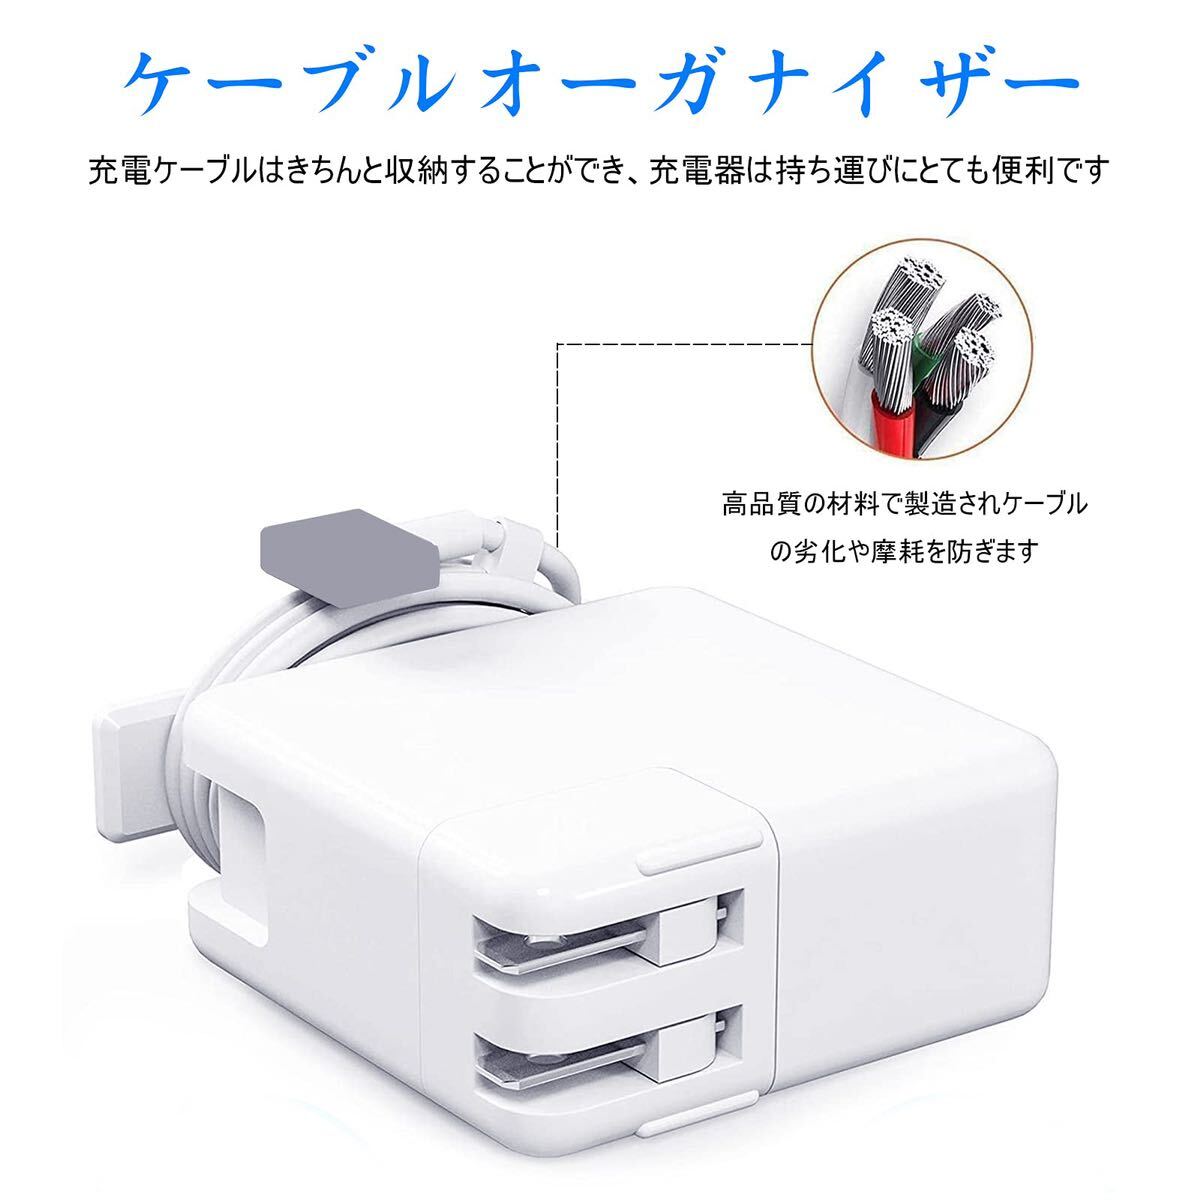 Macbook Air用 充電器 45W Mag 2 T 型 互換 電源アダプタ A1435 / A1436 / A1465 / A1466 T字コネクタ 11インチおよび13インチ(H84)